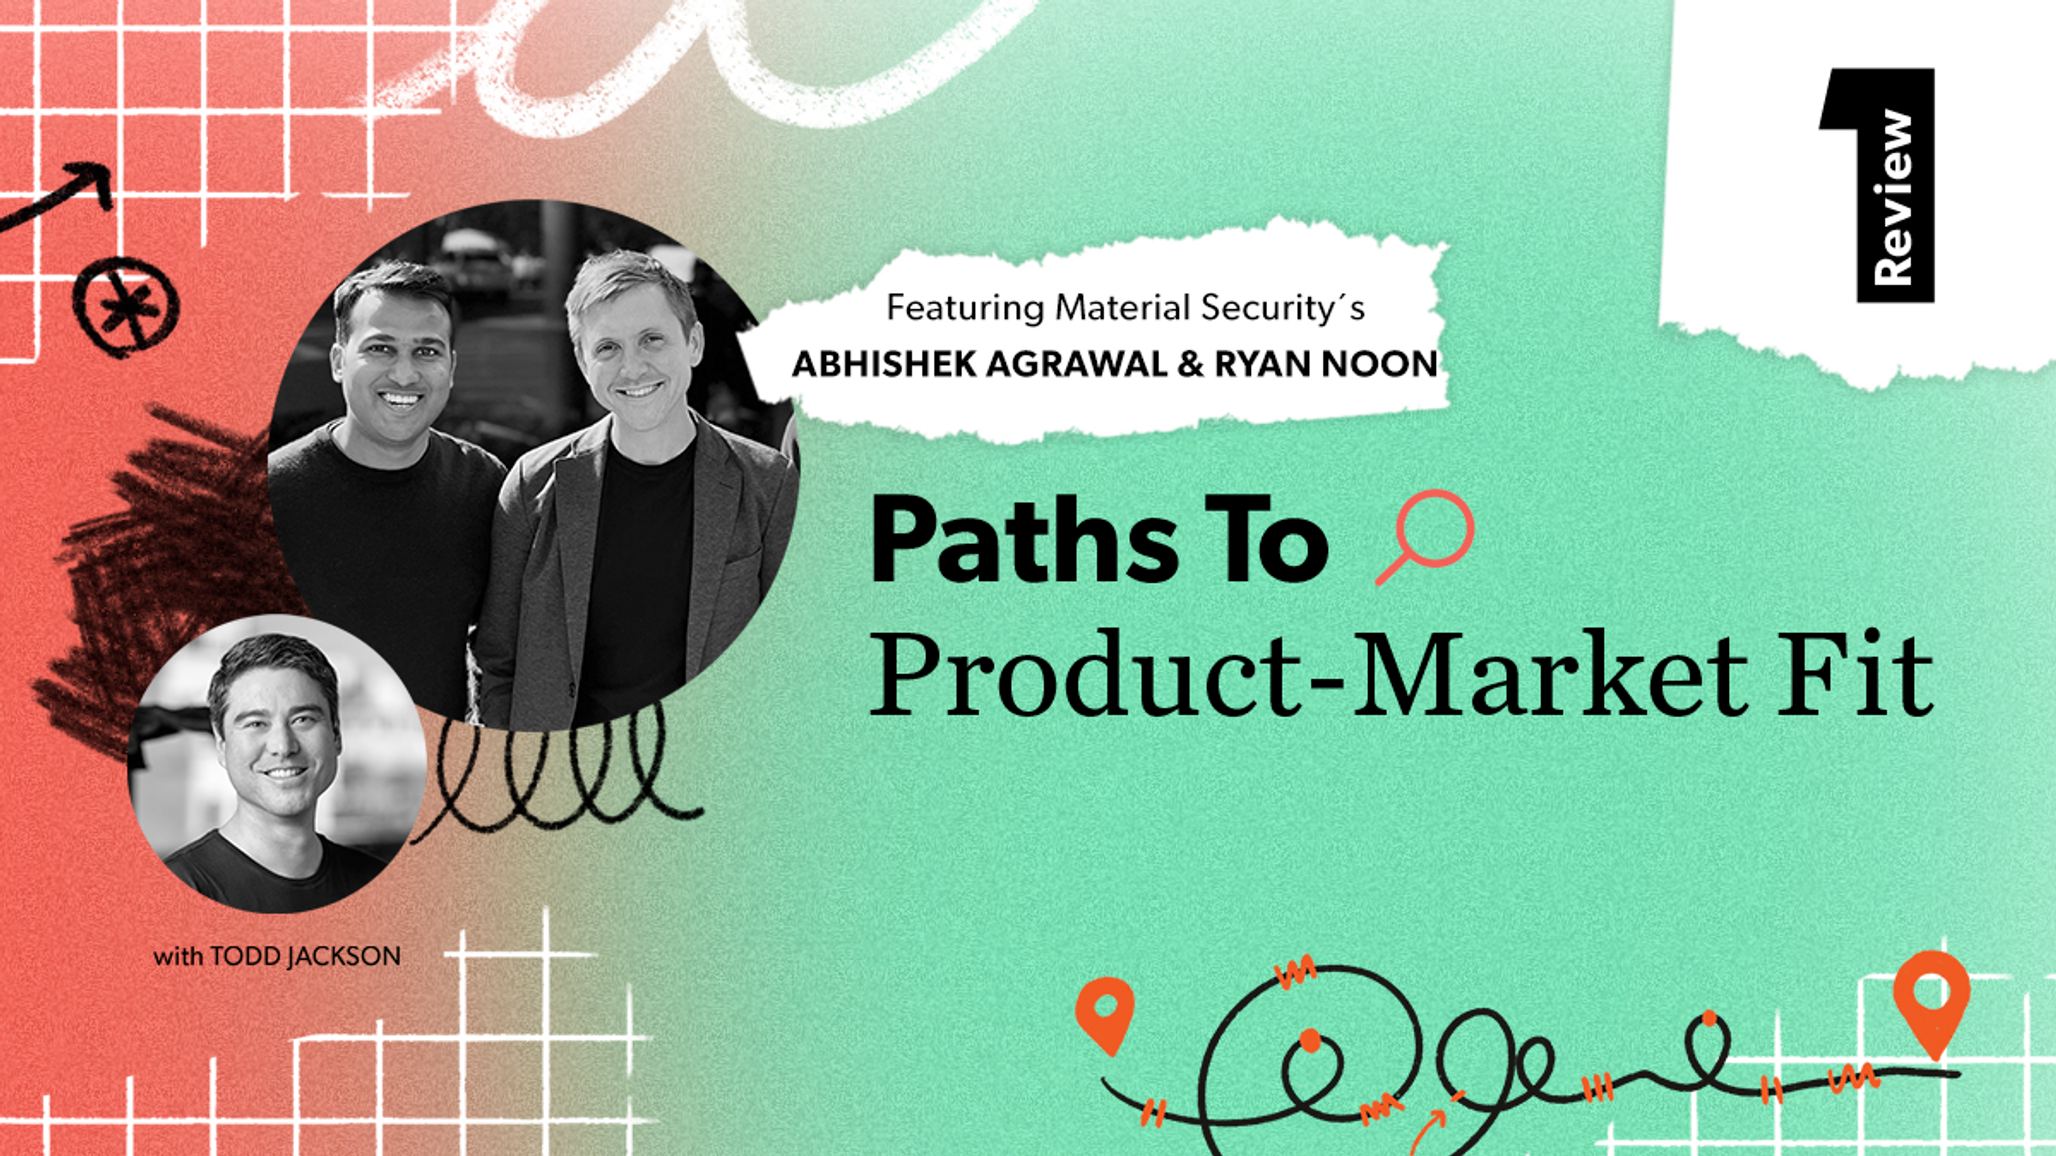 Cover image for Material Security’s Path to Product-Market Fit — Find Your Winning Idea by Selling Products That Don’t Exist Yet